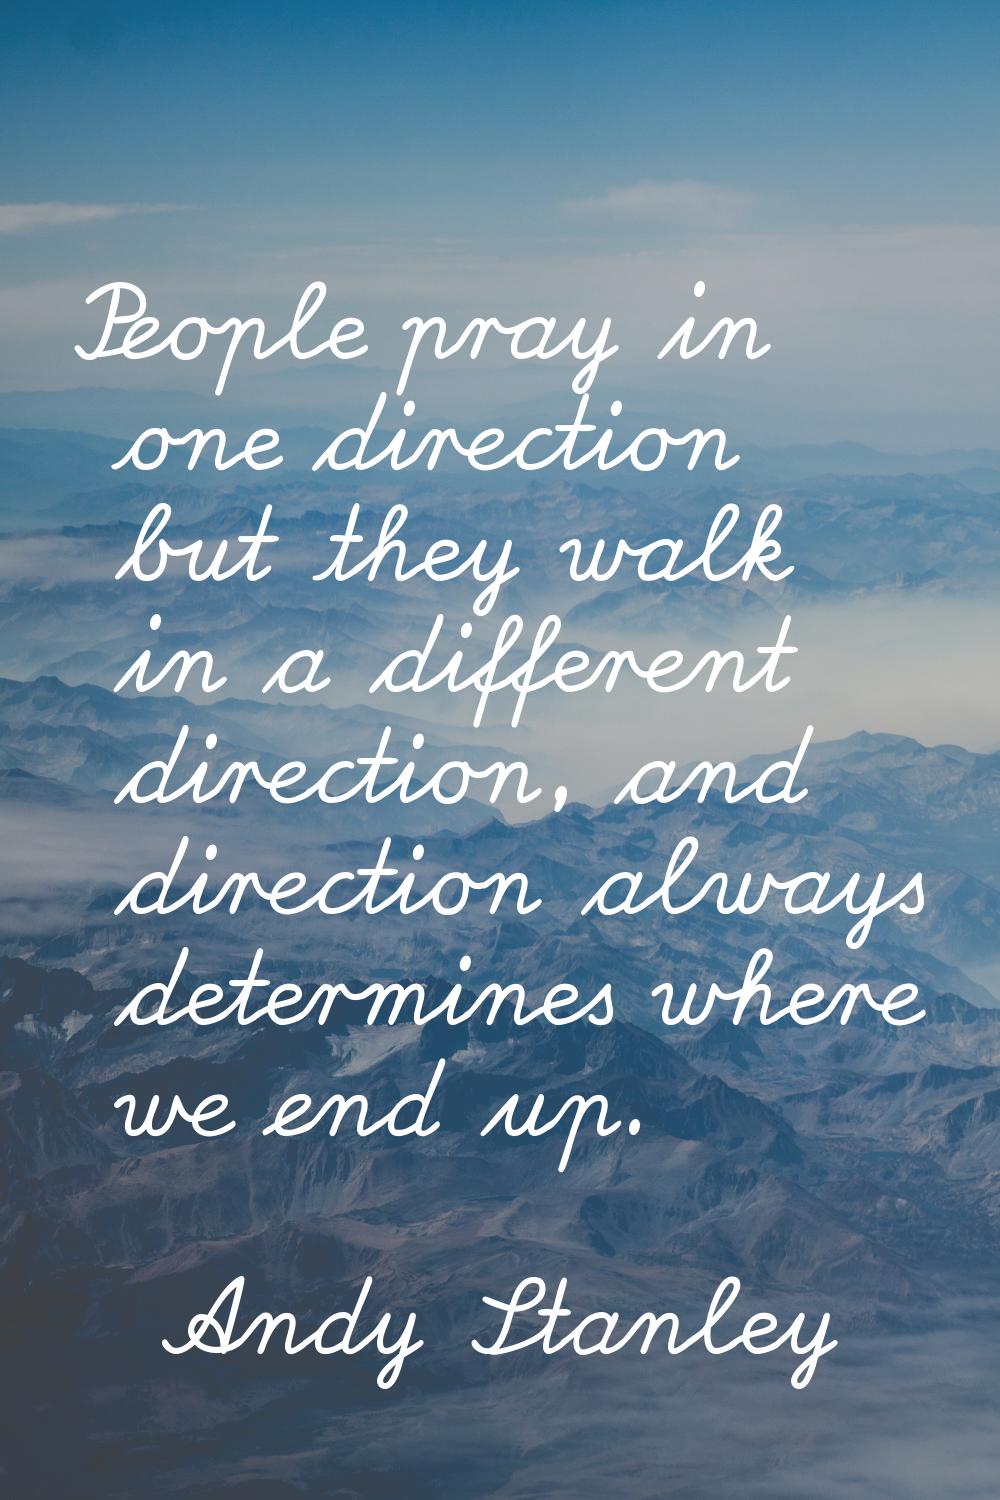 People pray in one direction but they walk in a different direction, and direction always determine